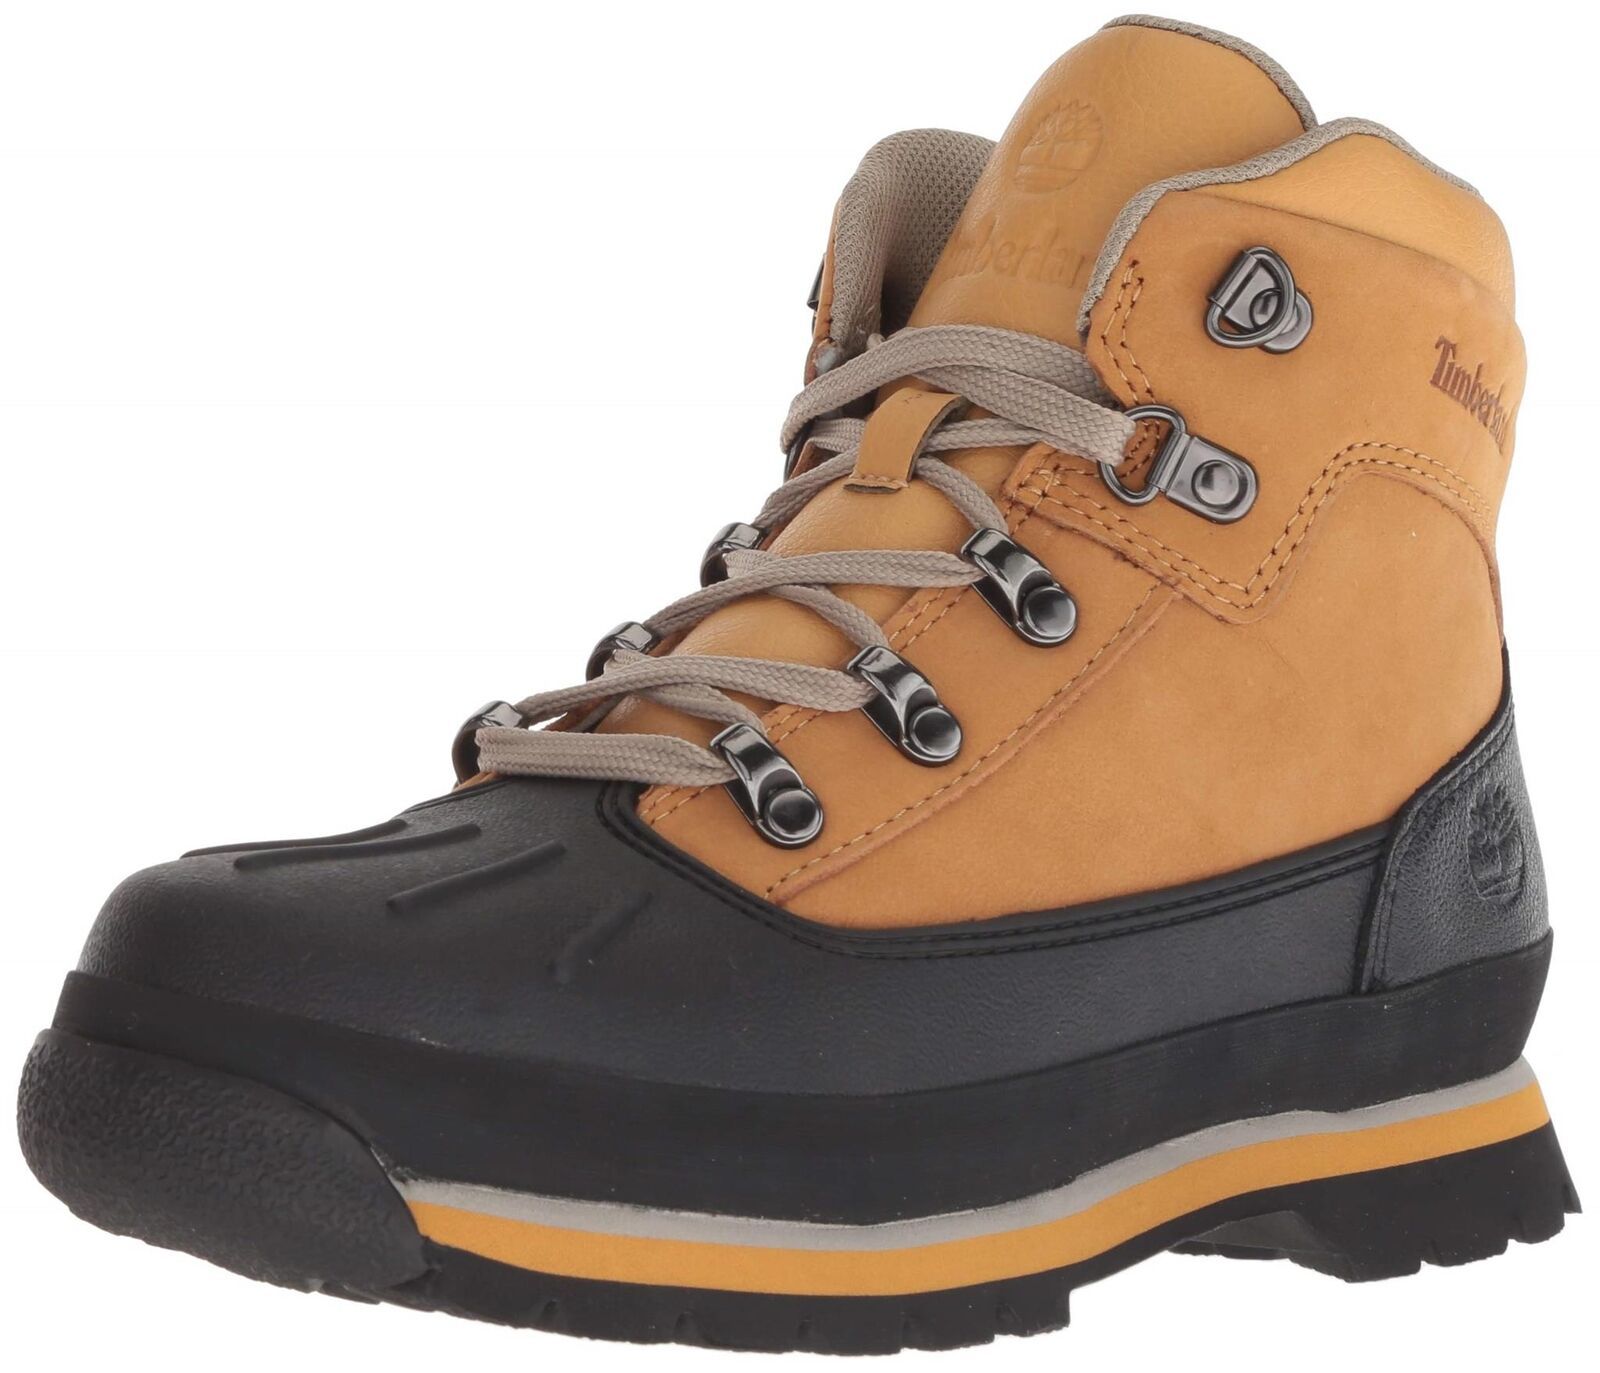 Primary image for Timberland Euro Hiker Shell Toe Boot Wheat Brown Nubuck Unisex Kid size 5.5